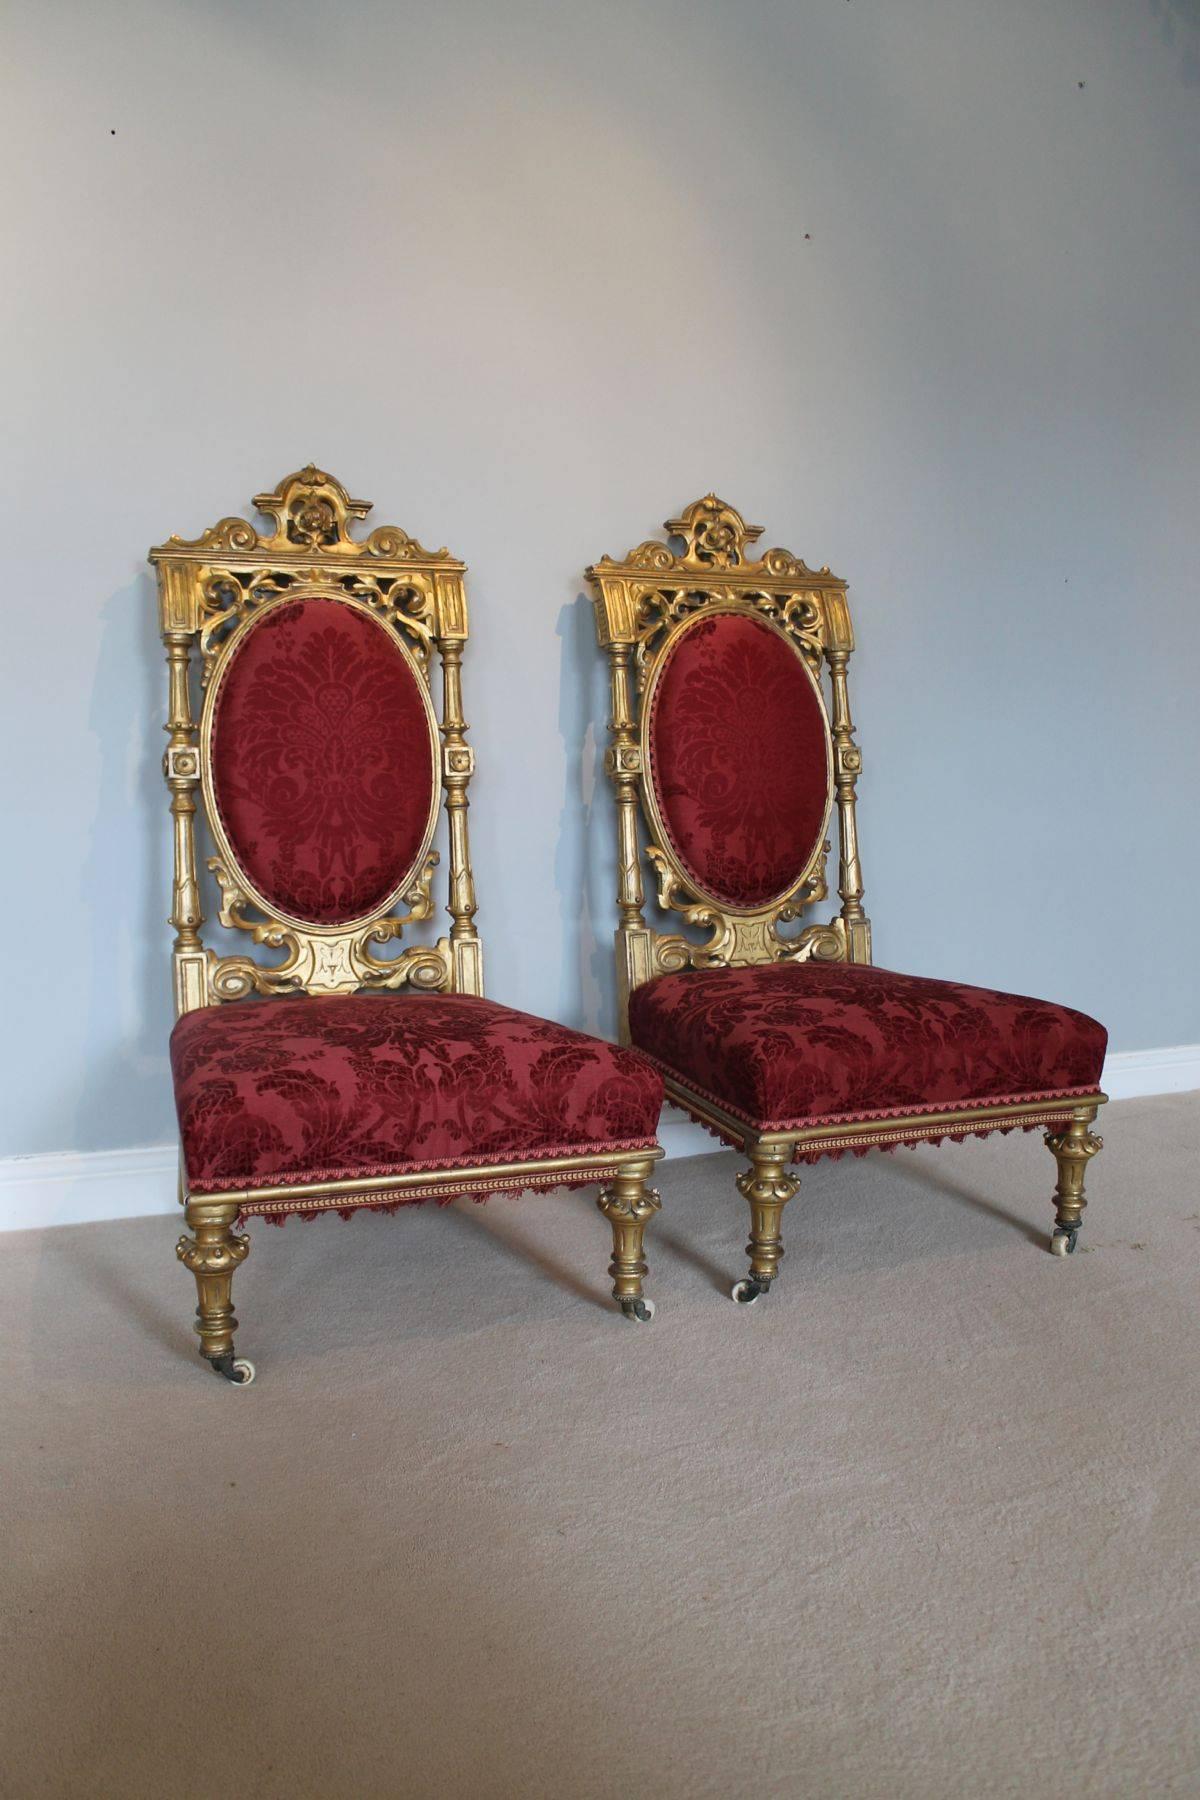 A very stylish and useful pair of English, late 19 century Aesthetic Movement chairs. The original gilding has a wonderful mellow, evenly worn appearance, with wear commensurate with the age of the item. Very useable and perfect for a hallway or